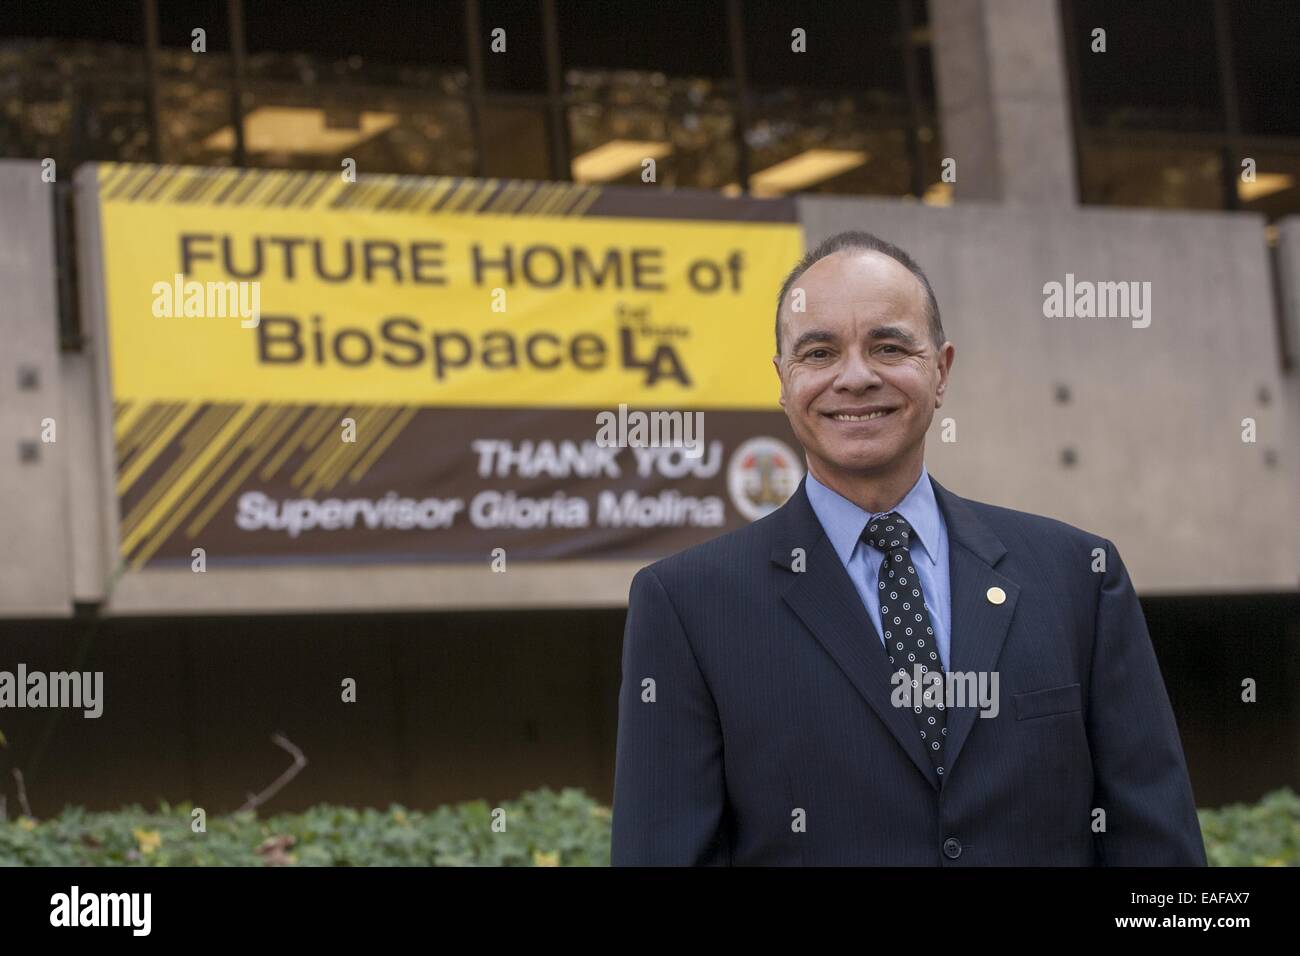 Los Angeles, California, USA. 13th Oct, 2014. Cal State Los Angeles President William Covino at physical sciences building. © Ringo Chiu/ZUMA Wire/Alamy Live News Stock Photo